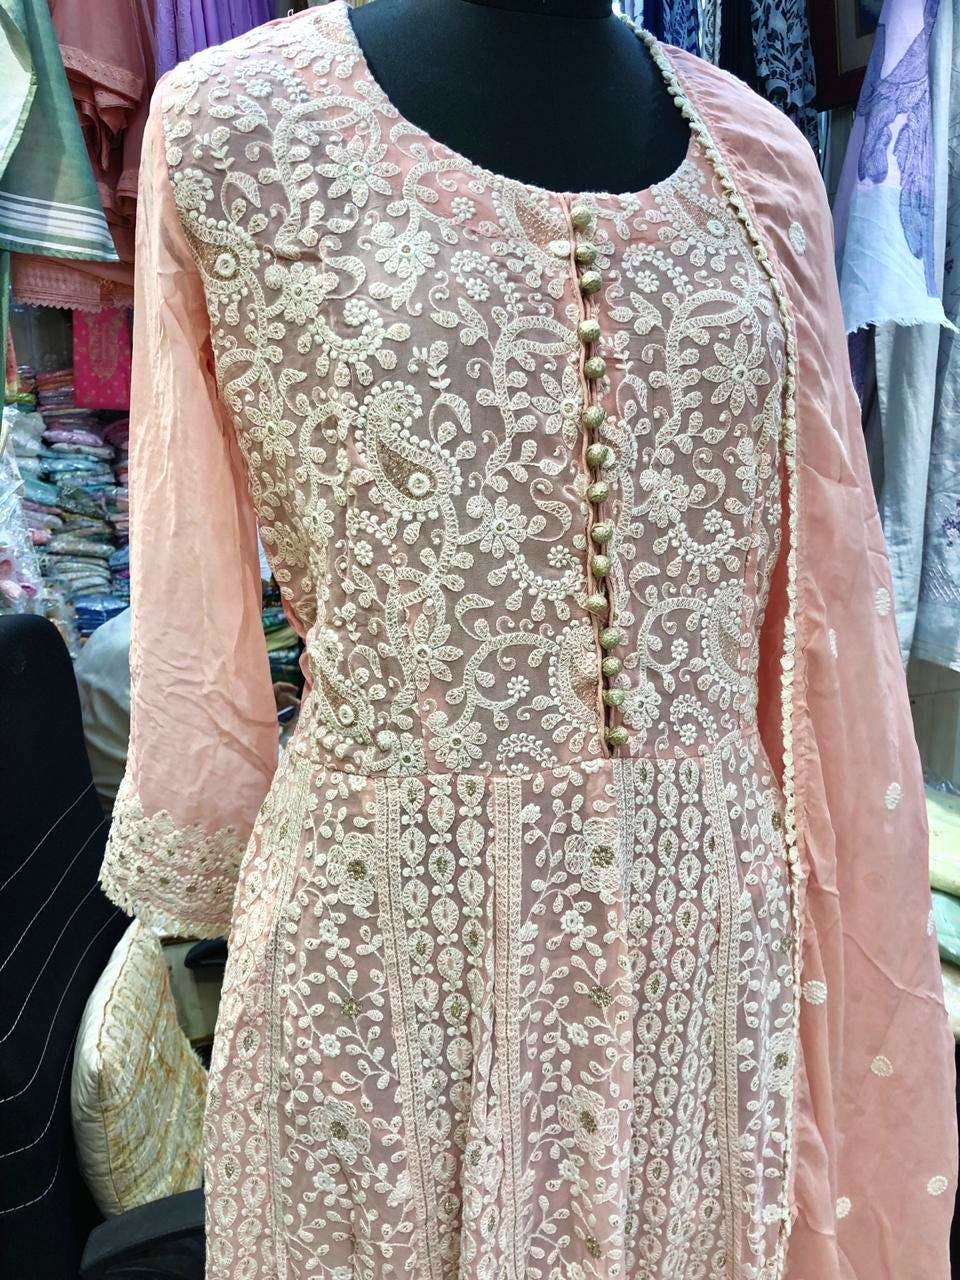 Clothing,Dress,Lace,Fashion,Day dress,Beige,Pattern,Textile,Peach,Sleeve